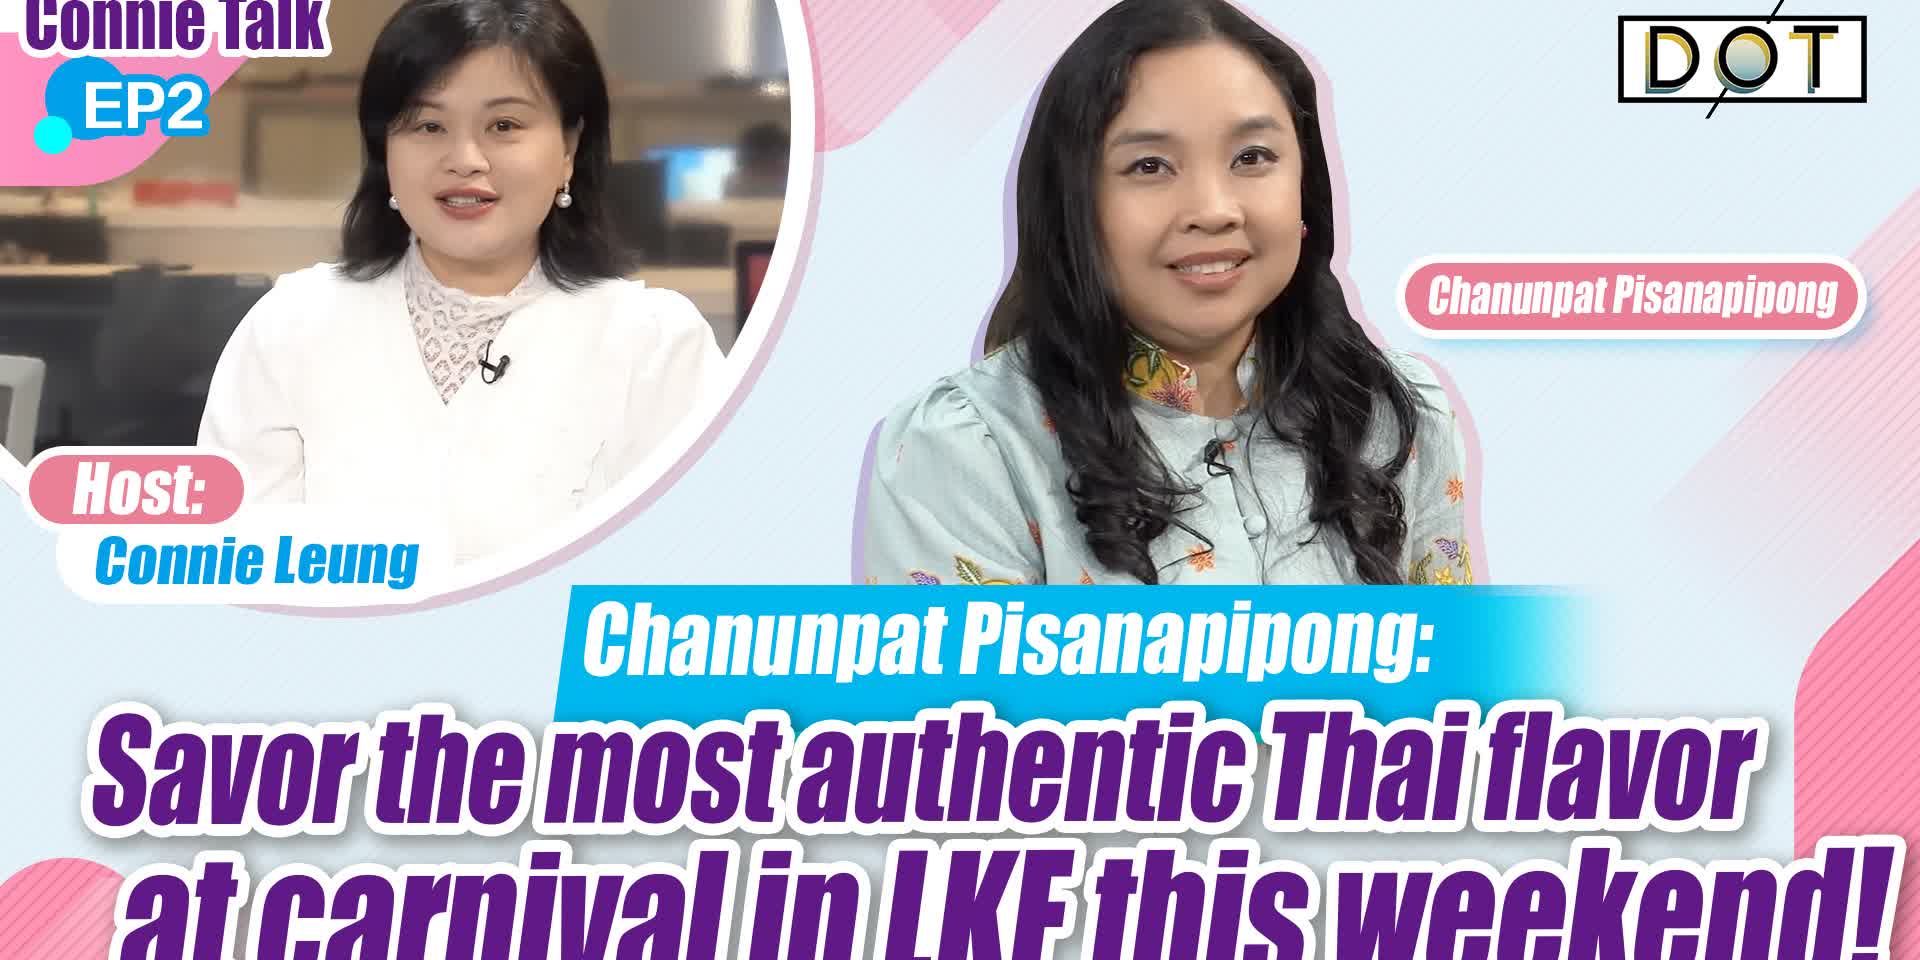 Connie Talk EP2 | Chanunpat Pisanapipong: Savor the most authentic Thai flavor at carnival in LKF this weekend!